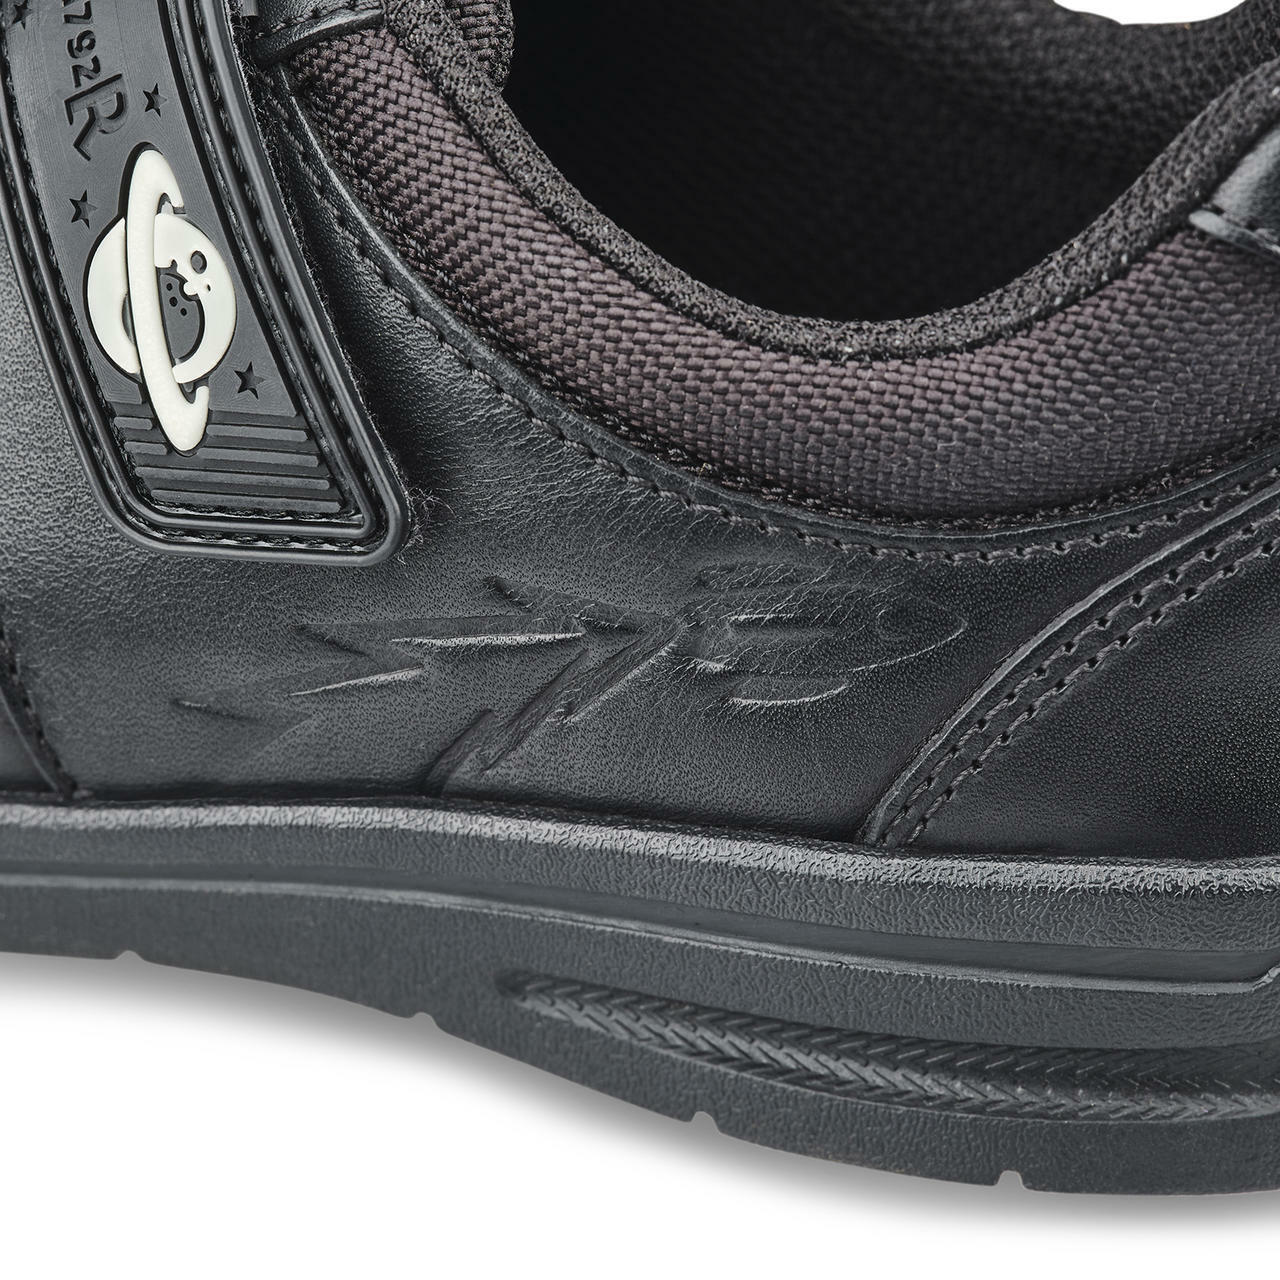 A boys school shoe by Start Rite,style Rocket, in black leather with double velcro fastening. Close up  view.